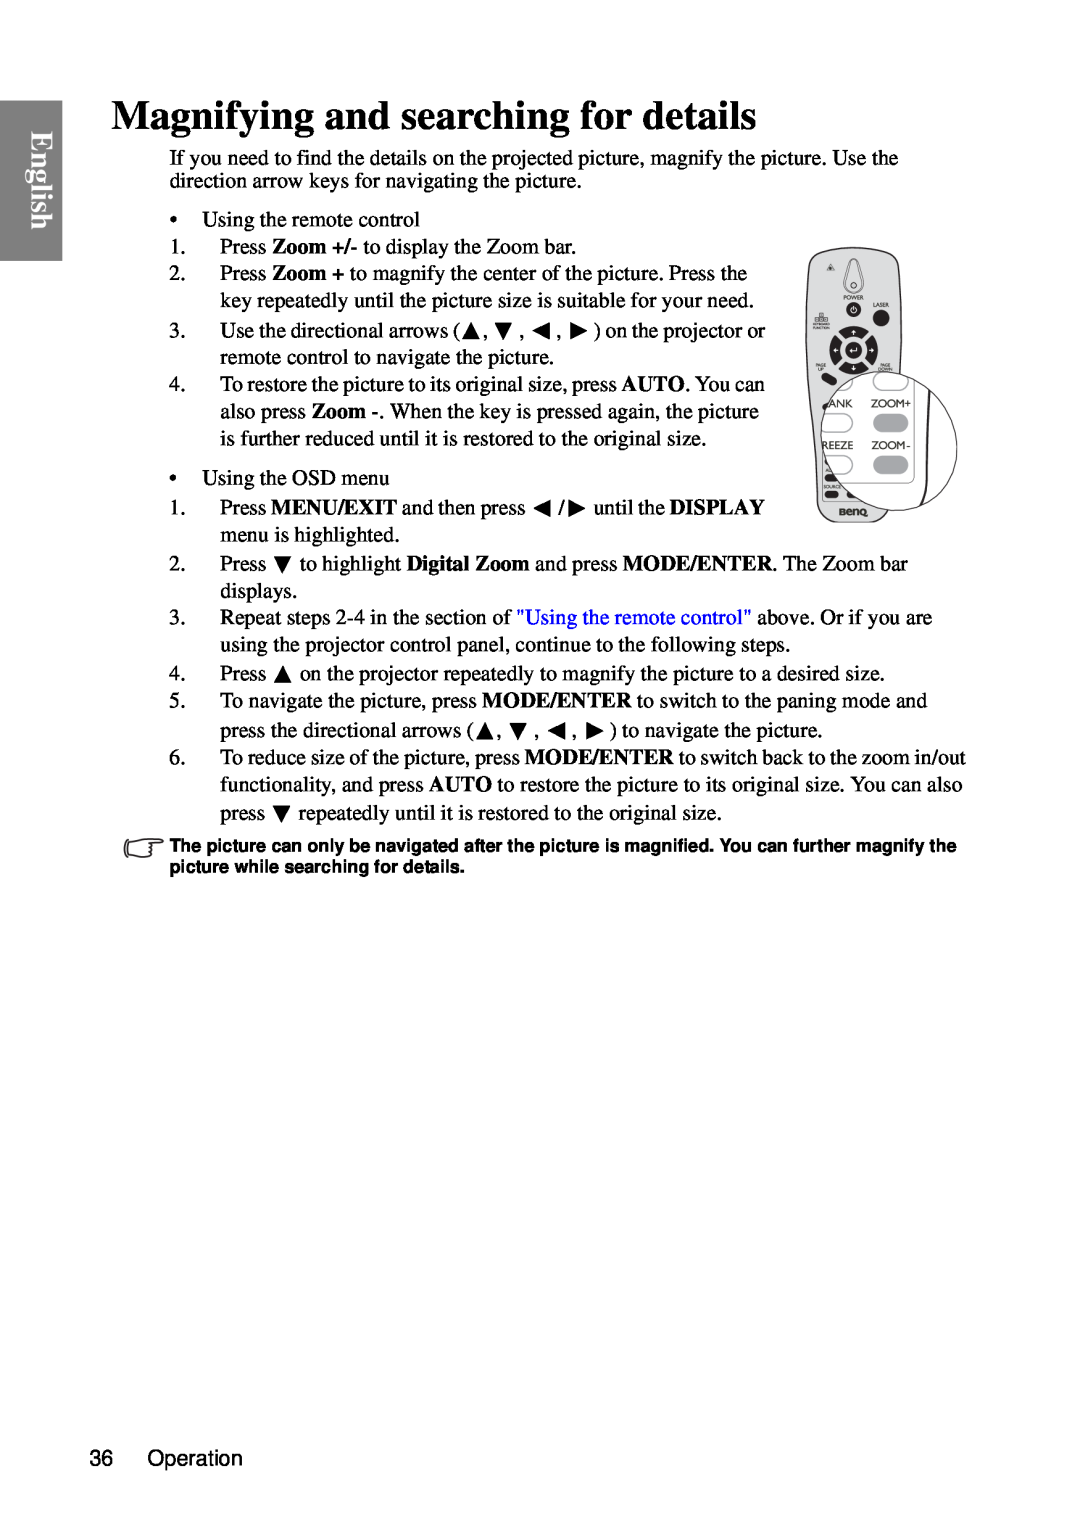 BenQ MP735, MP727 user manual Magnifying and searching for details, English, Operation 